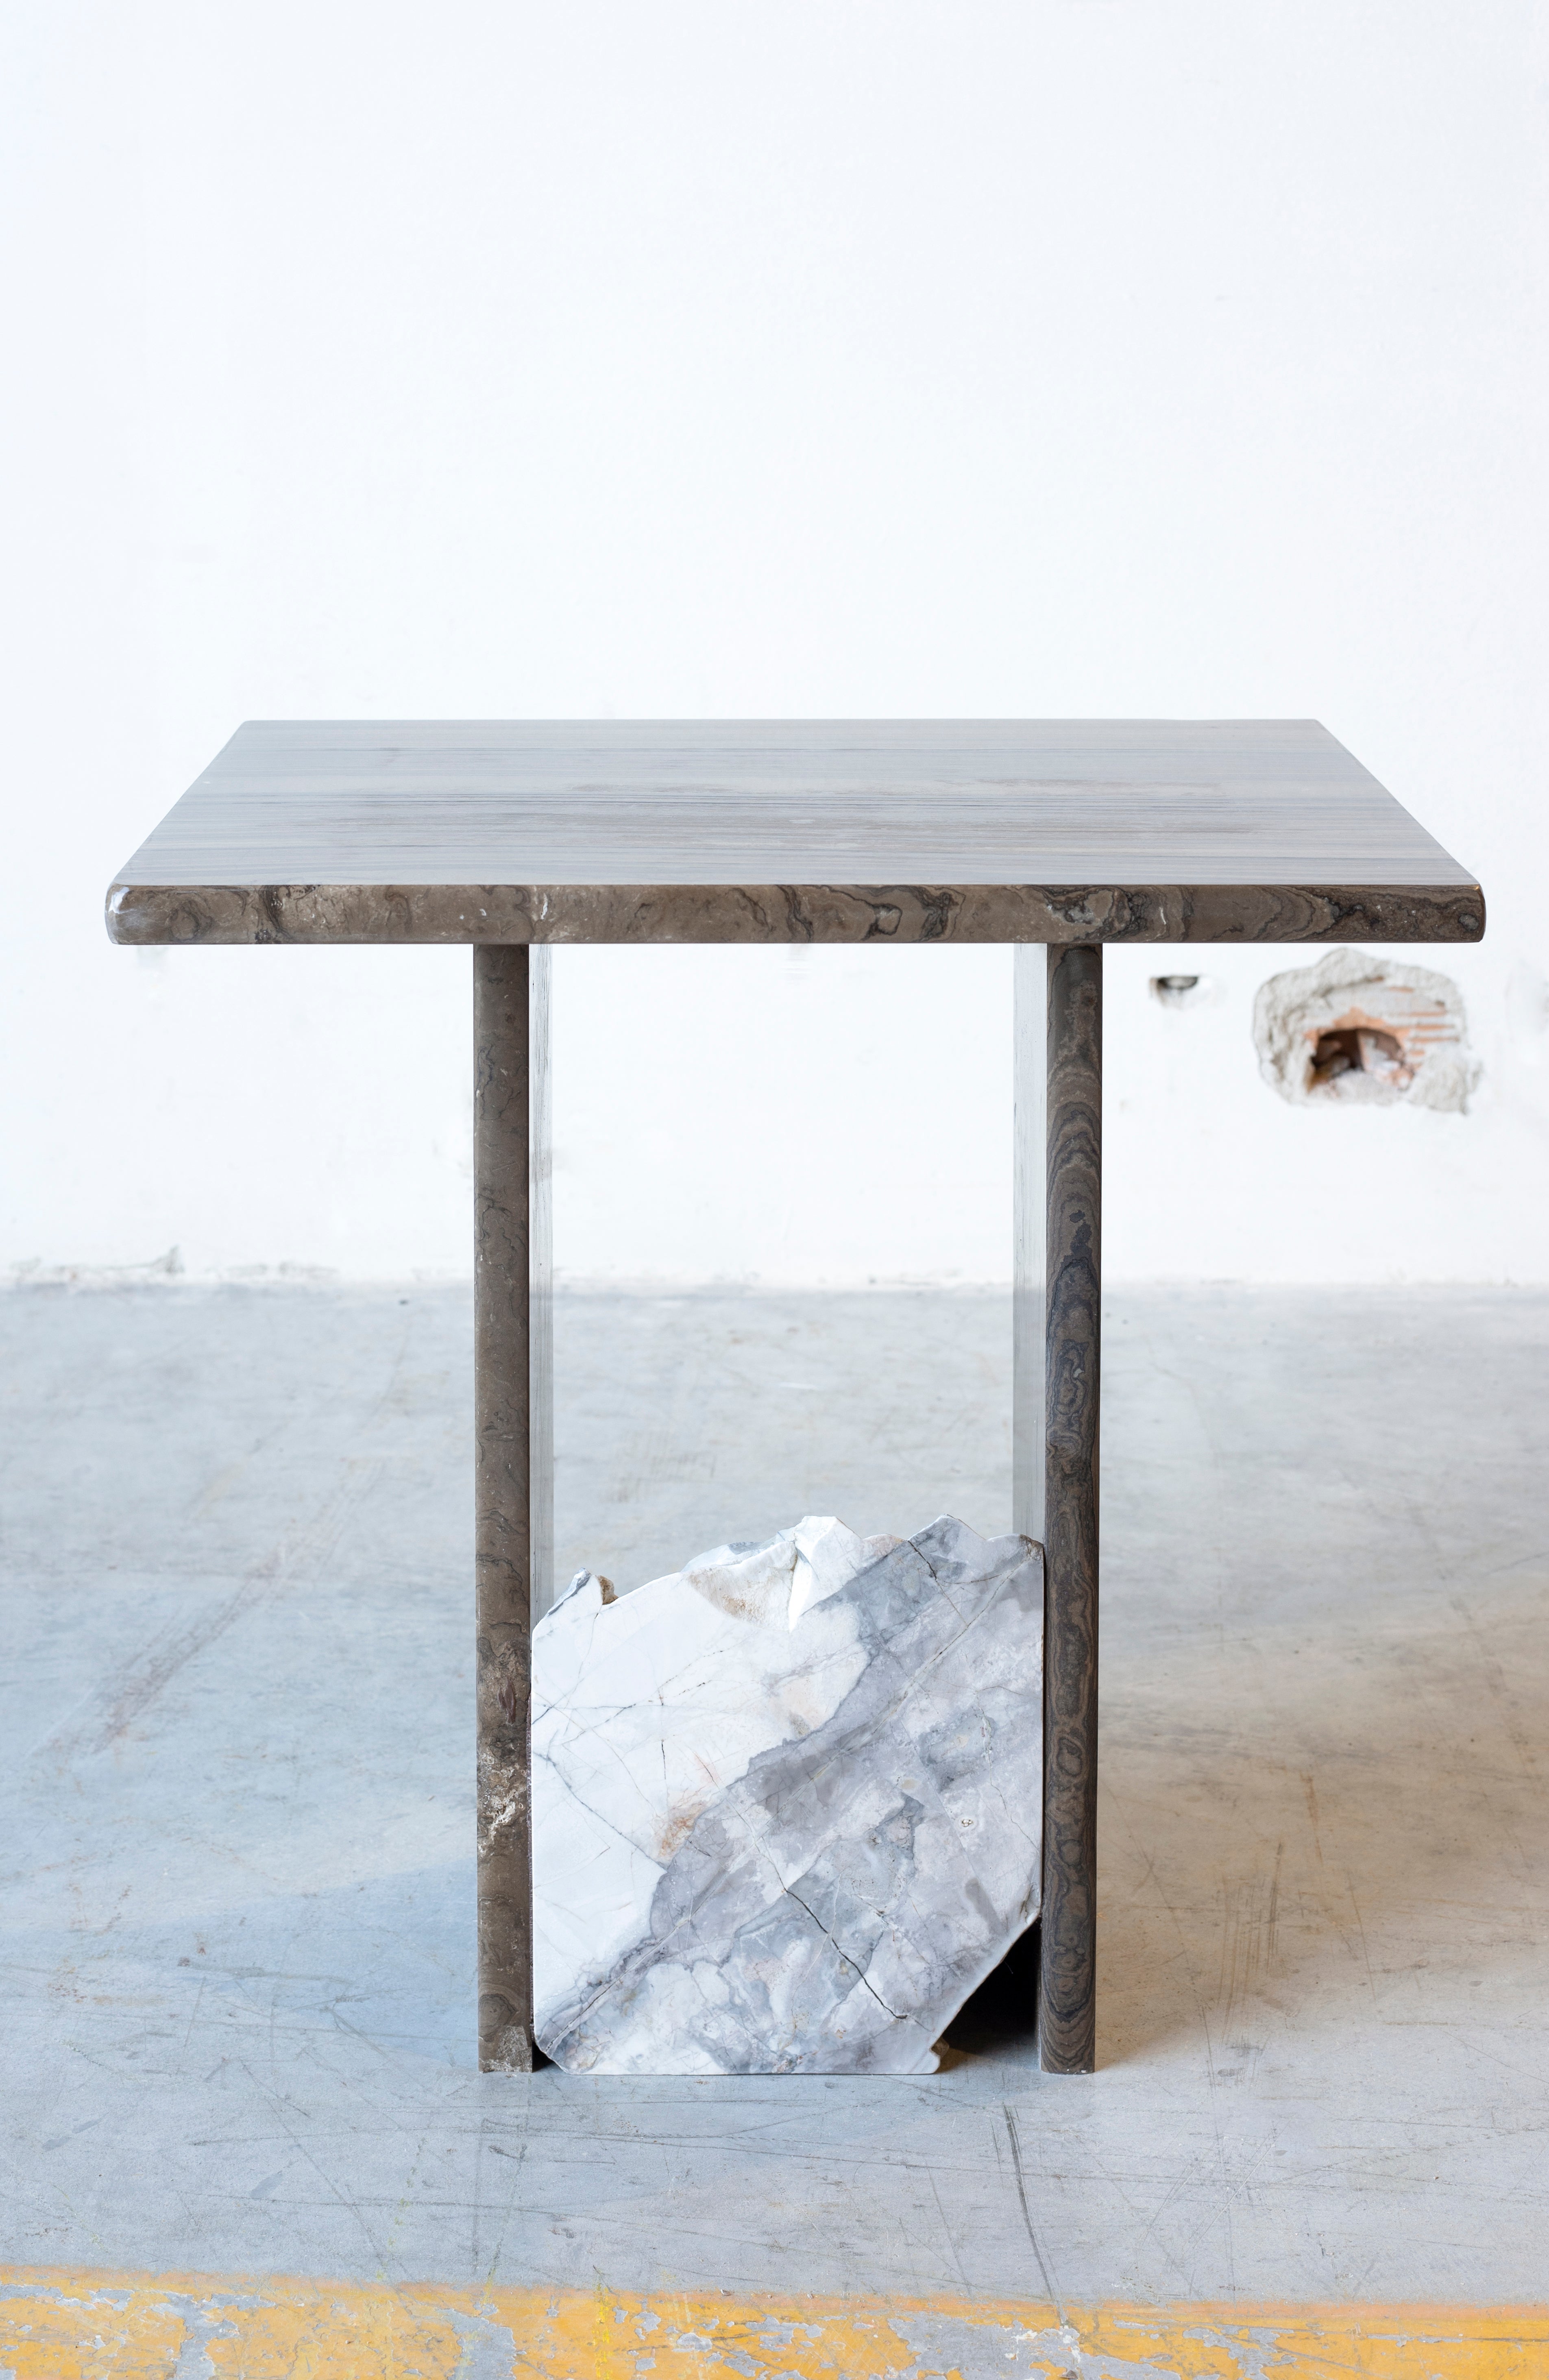 SST013-1 coffee table by Stone Stackers
Dimensions: D 36 x W 44.5 x H 55 cm
Materials: Eramosa marble, Invisible Grey marble.
Marble Structure: Eramosa
Marble Base: Invisible Grey
Weight: 23 kg

This coffee table combines sleek lines and sculptural